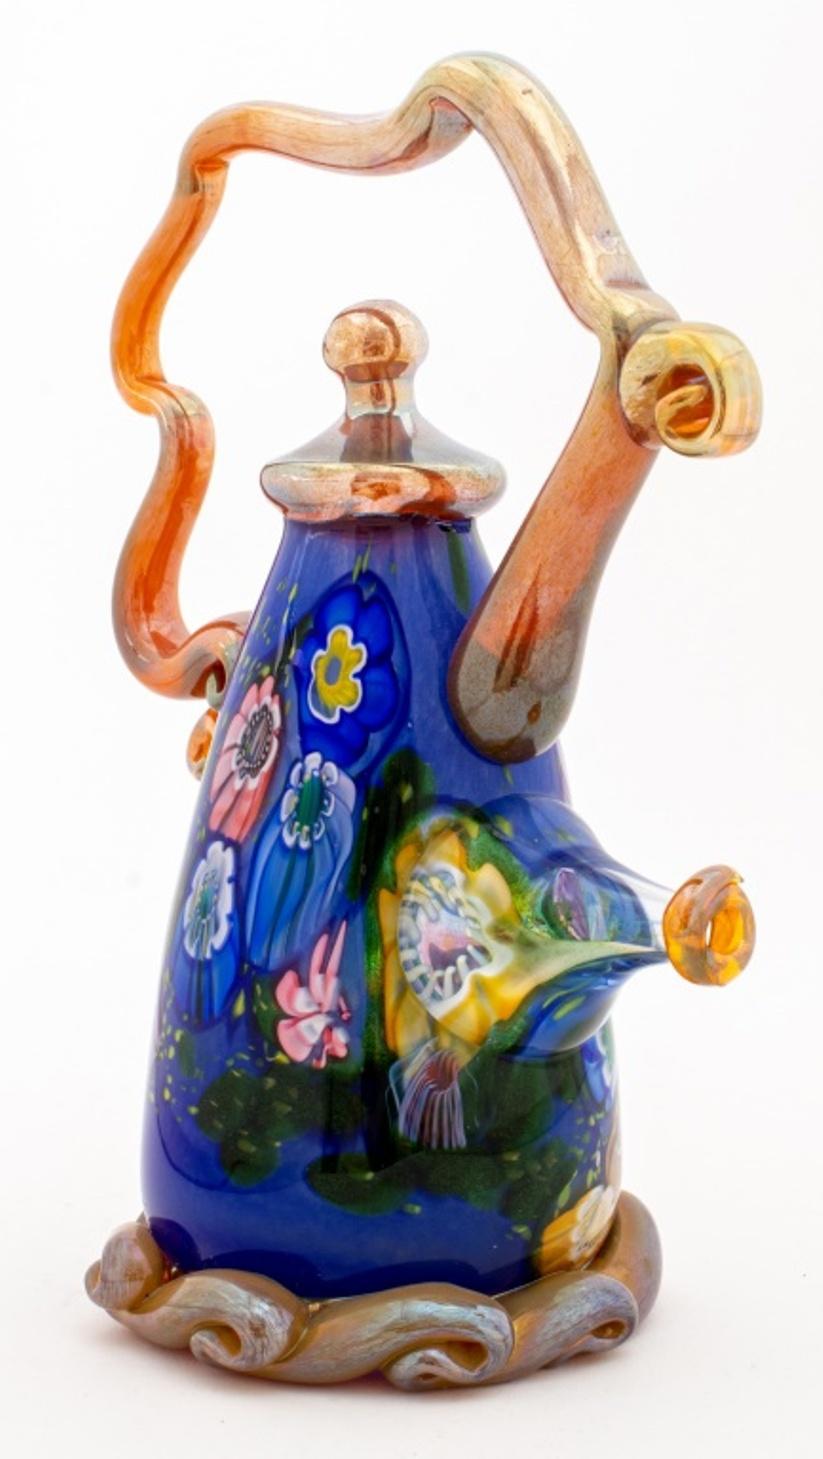 Paul Allen Counts (American, XX-XXI) studio art glass sculpture in the form of an oblong Surrealist teapot, the handle and borders in iridescent gold-tone glass, the body of blue glass with polychrome millefiori flowers, signed 